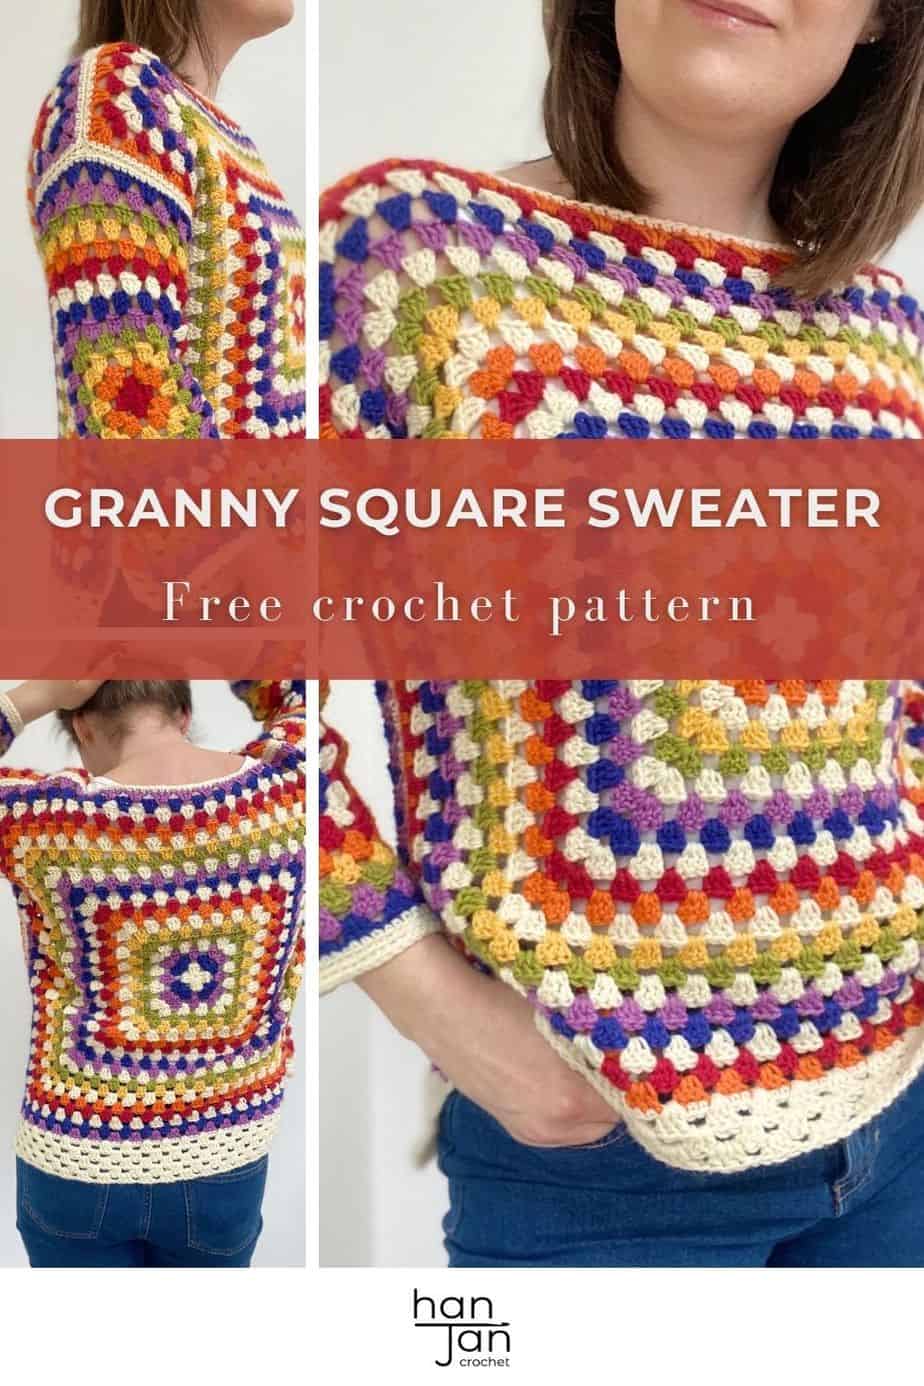 Collage of images showing rainbow granny square crochet sweater.